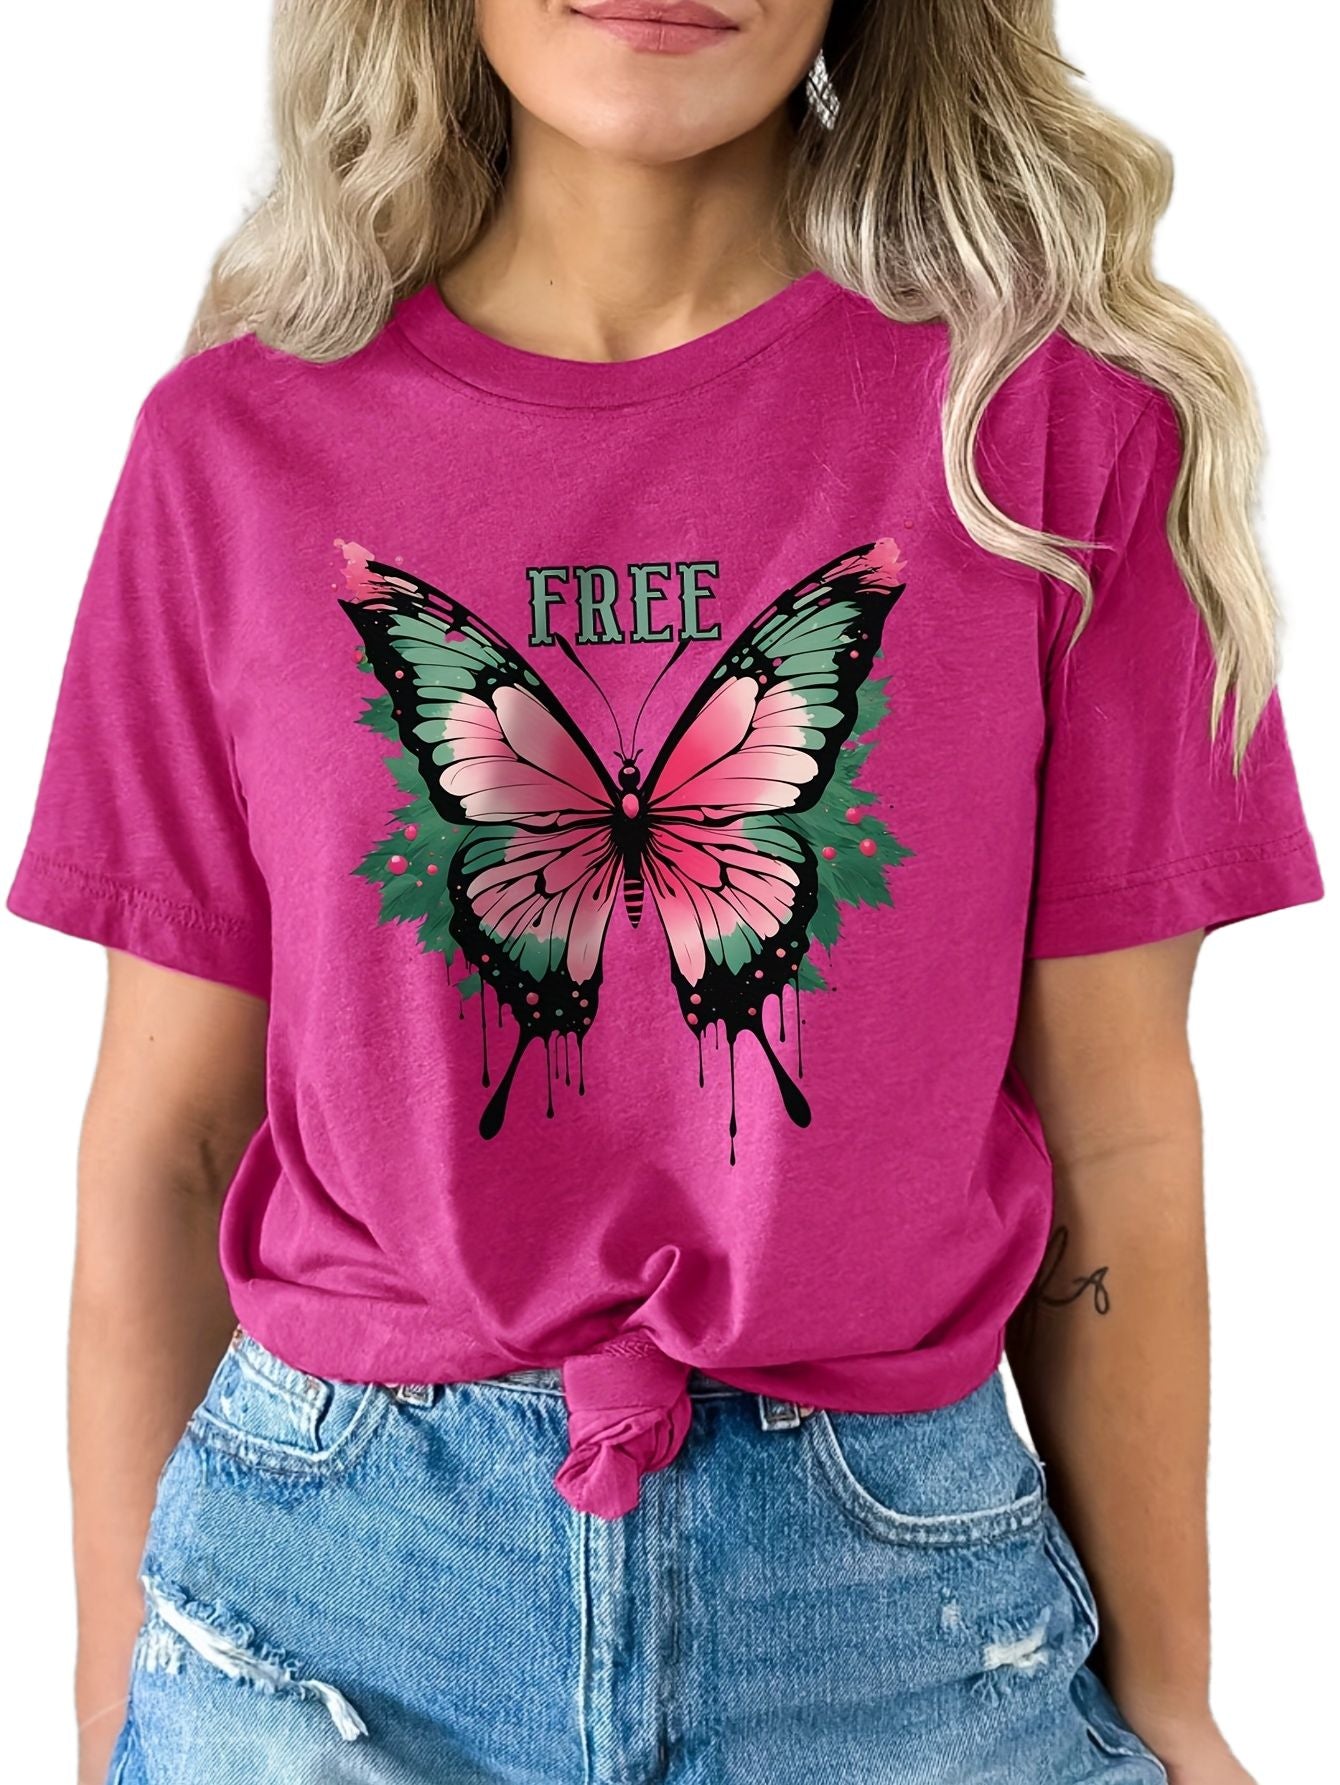 Butterfly & Free Letter Print T-shirt, Casual Crew Neck Short Sleeve Top For Spring & Summer, Women's Clothing